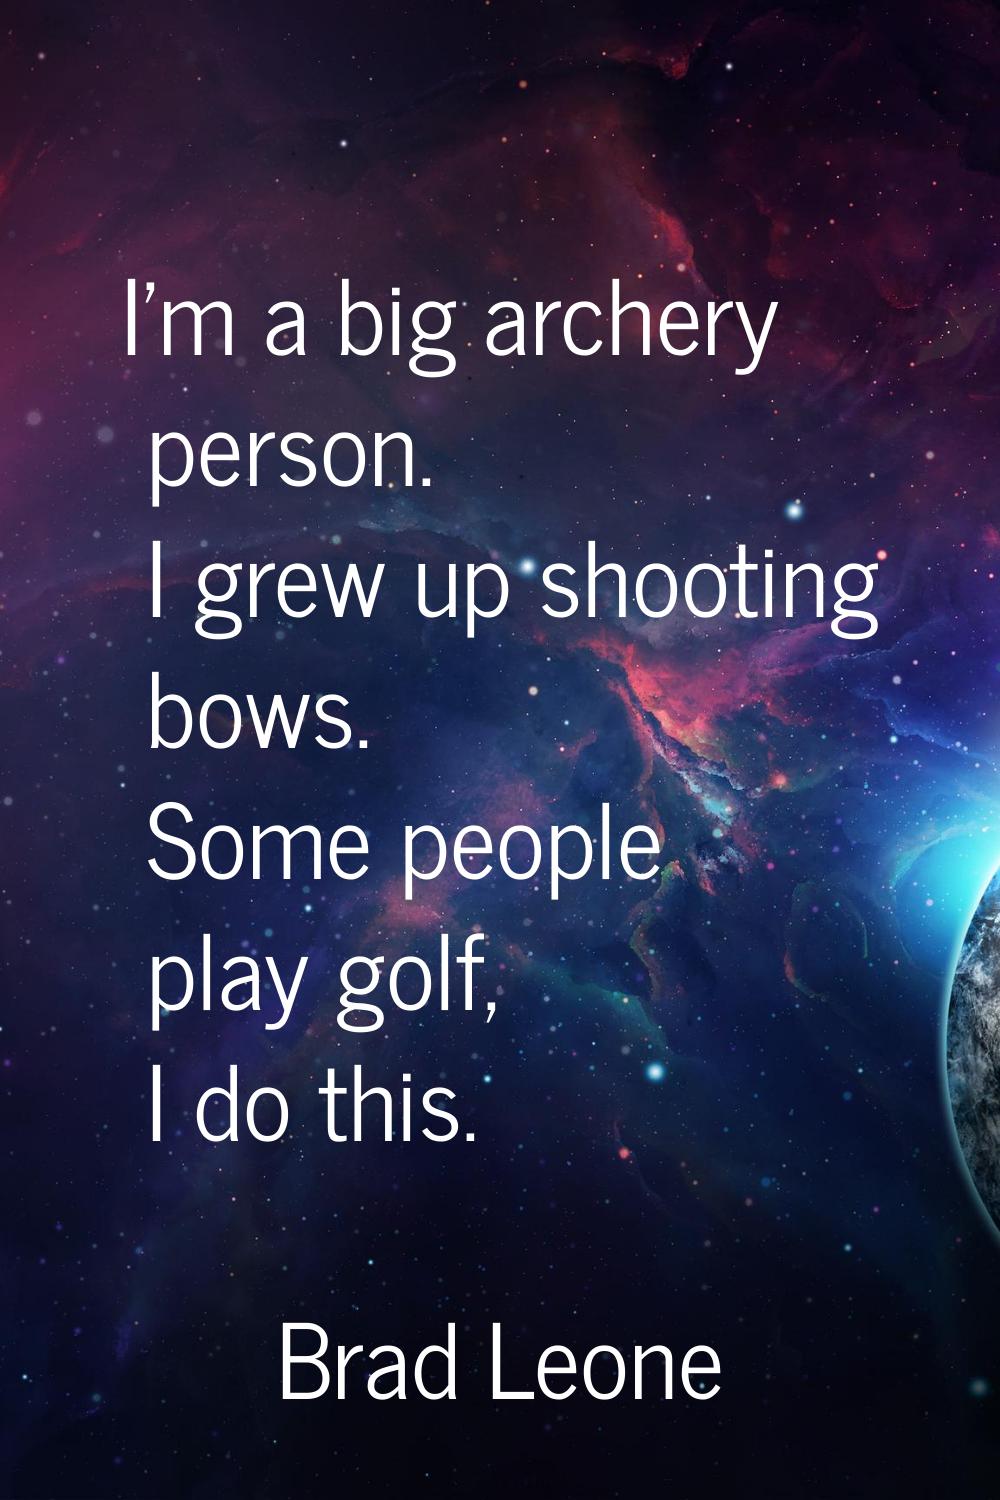 I'm a big archery person. I grew up shooting bows. Some people play golf, I do this.